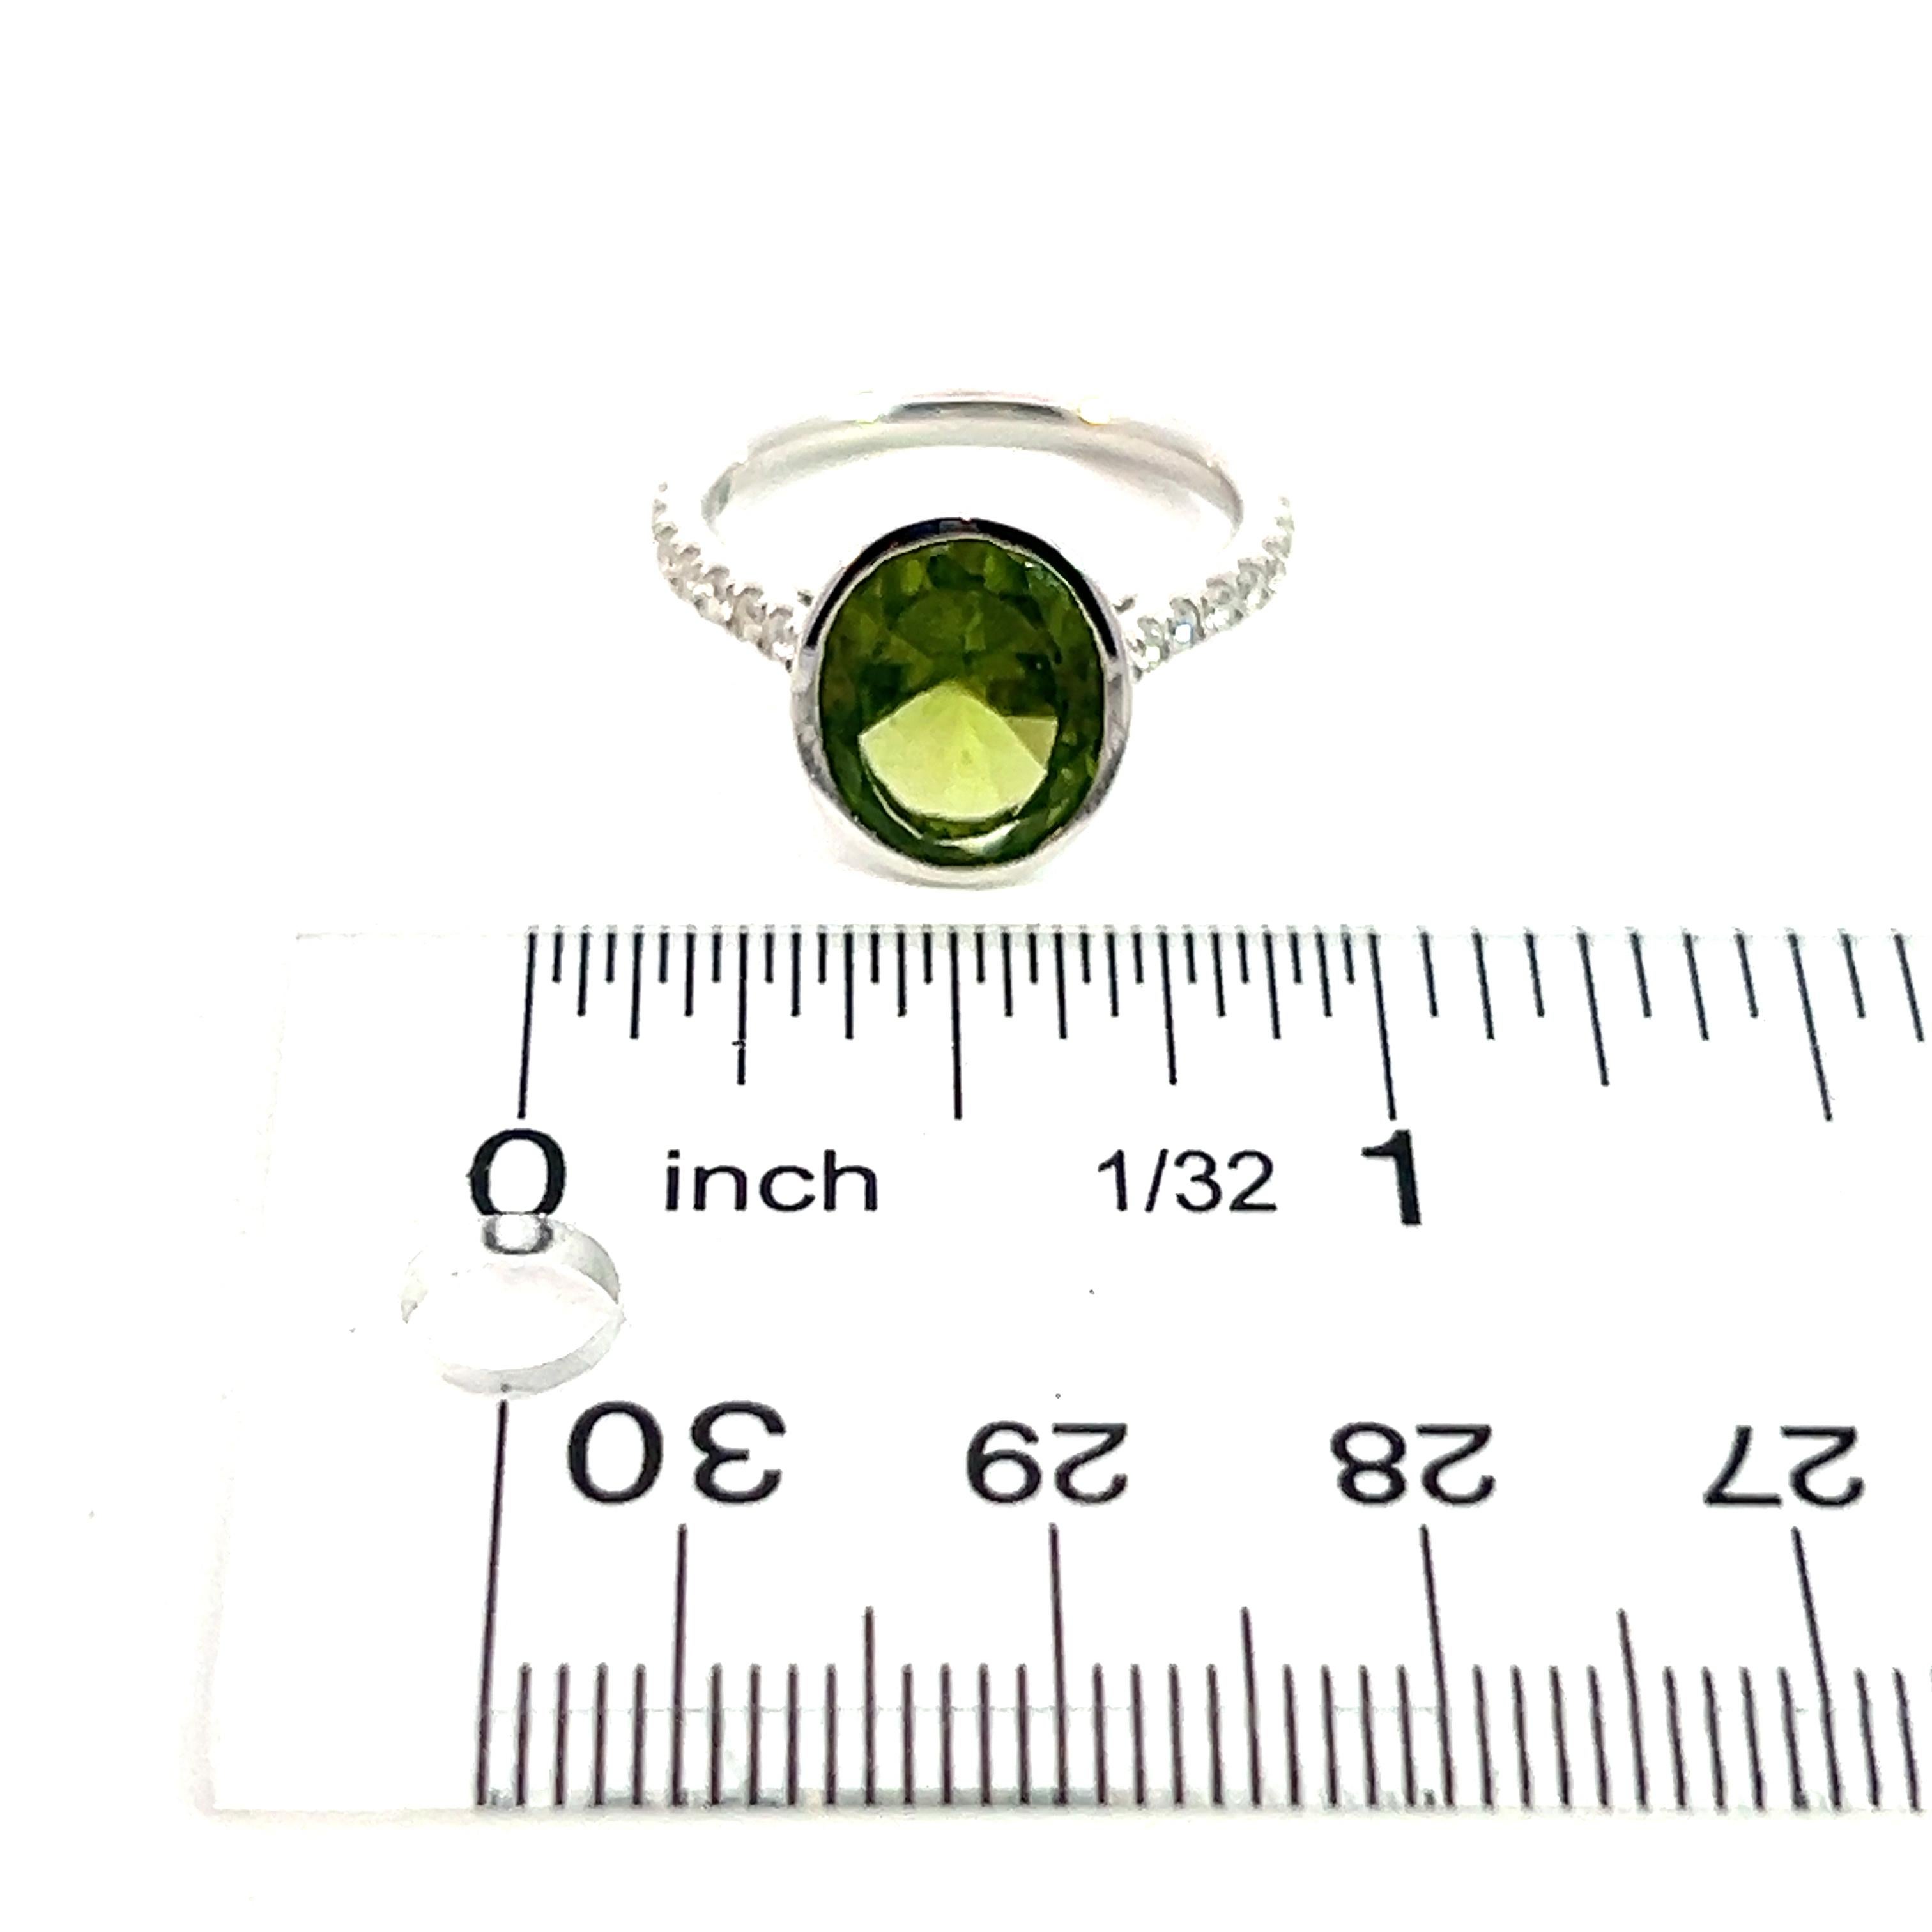 Natural Peridot Diamond Ring 6.5 14k W Gold 3.49 TCW Certified For Sale 3